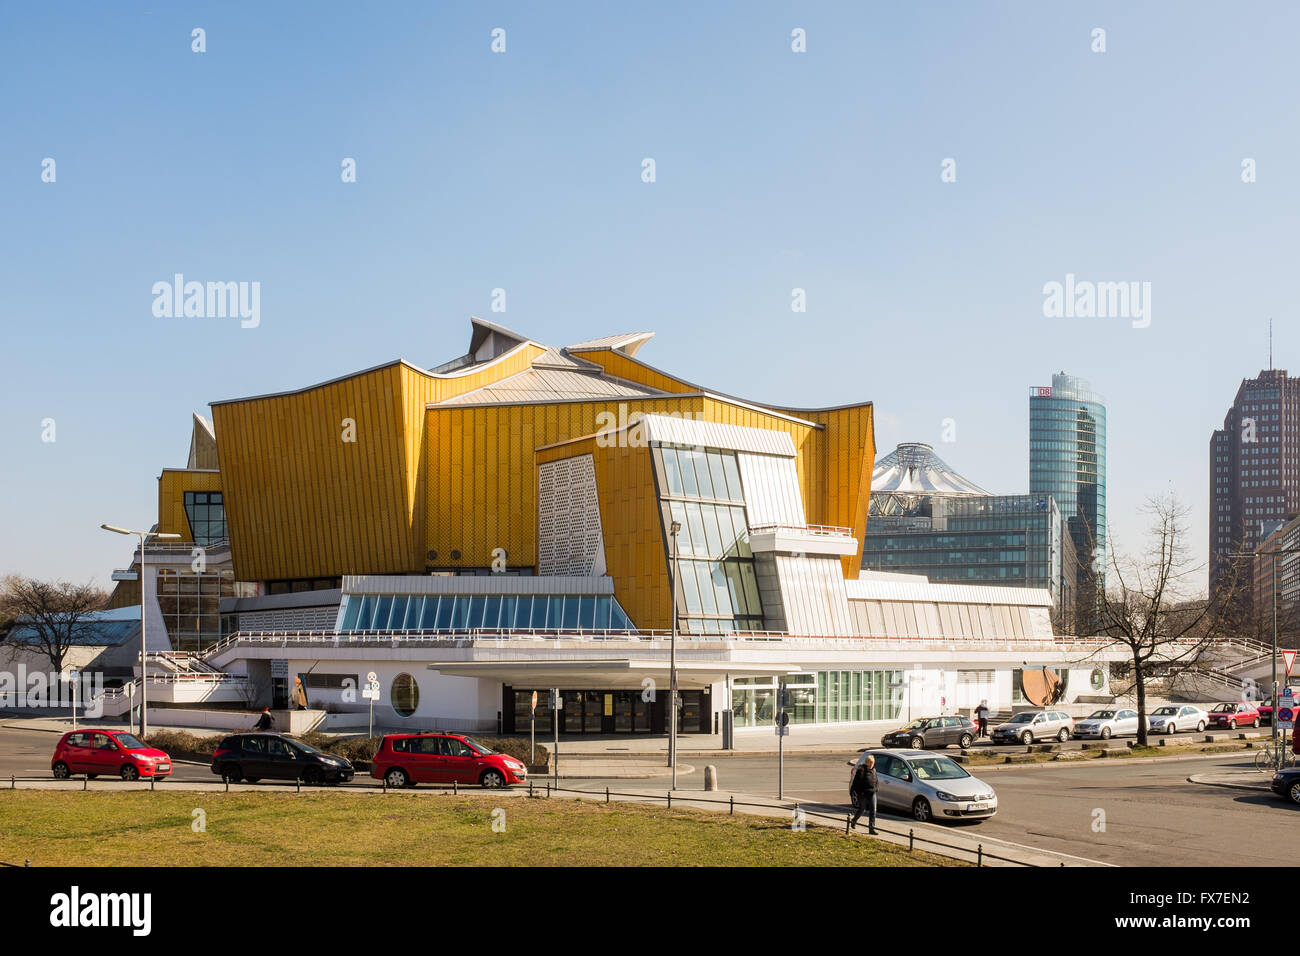 BERLIN, MARCH 16: The Berliner Philharmonie on March 16, 2016. A world famous known concert hall in Berlin. Stock Photo